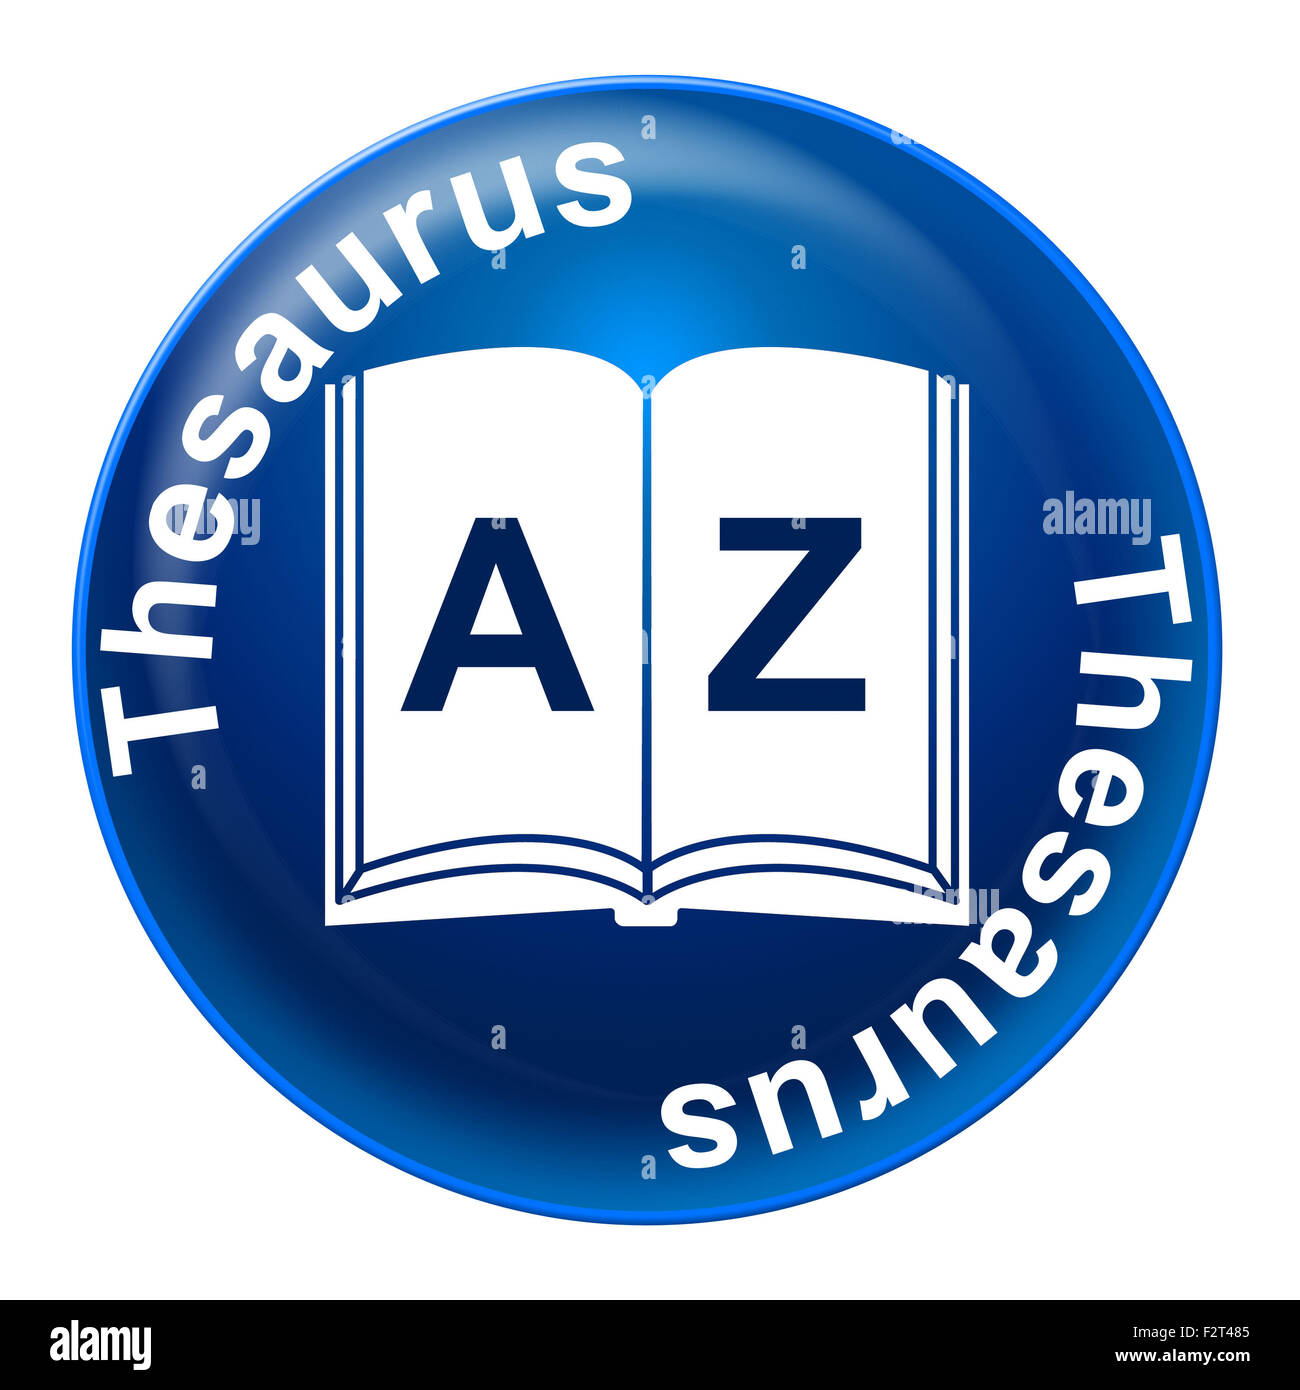 Thesaurus Sign Representing Know How And Display Stock Photo